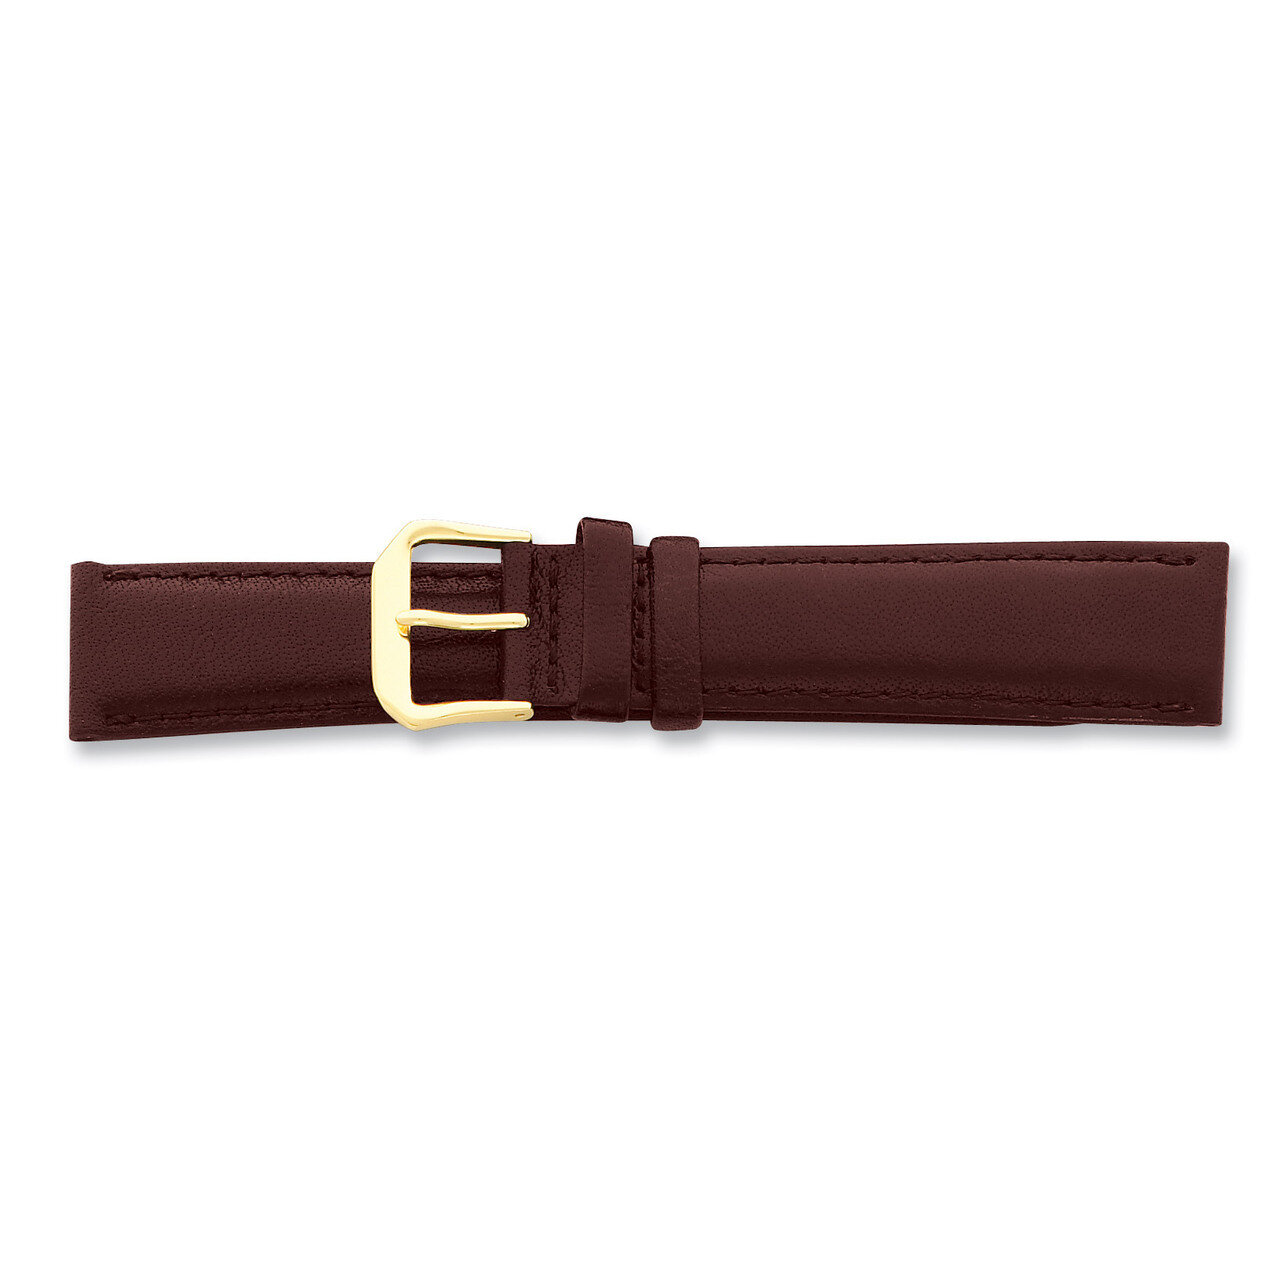 18mm Long Brown Smooth Leather Gld-tone Buckle Watch Band BA84L-18